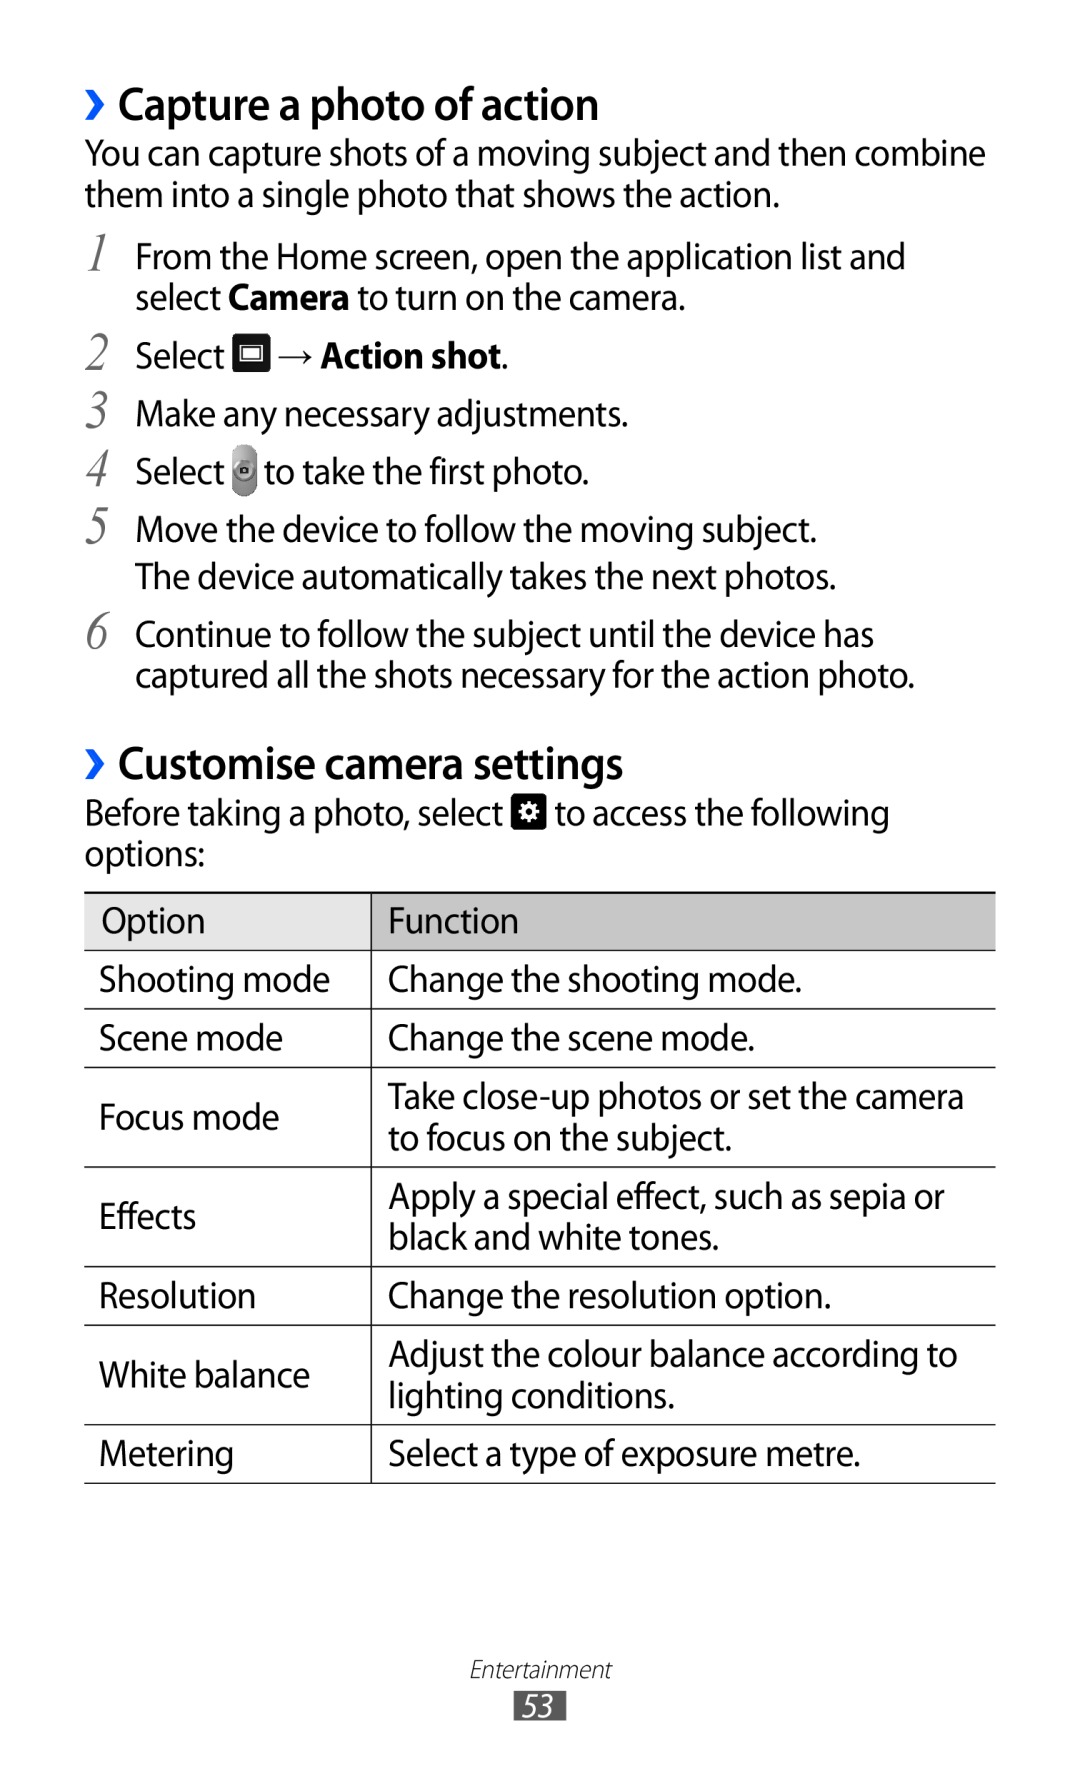 Samsung GT-P7510 user manual ››Capture a photo of action, ››Customise camera settings, Select → Action shot 